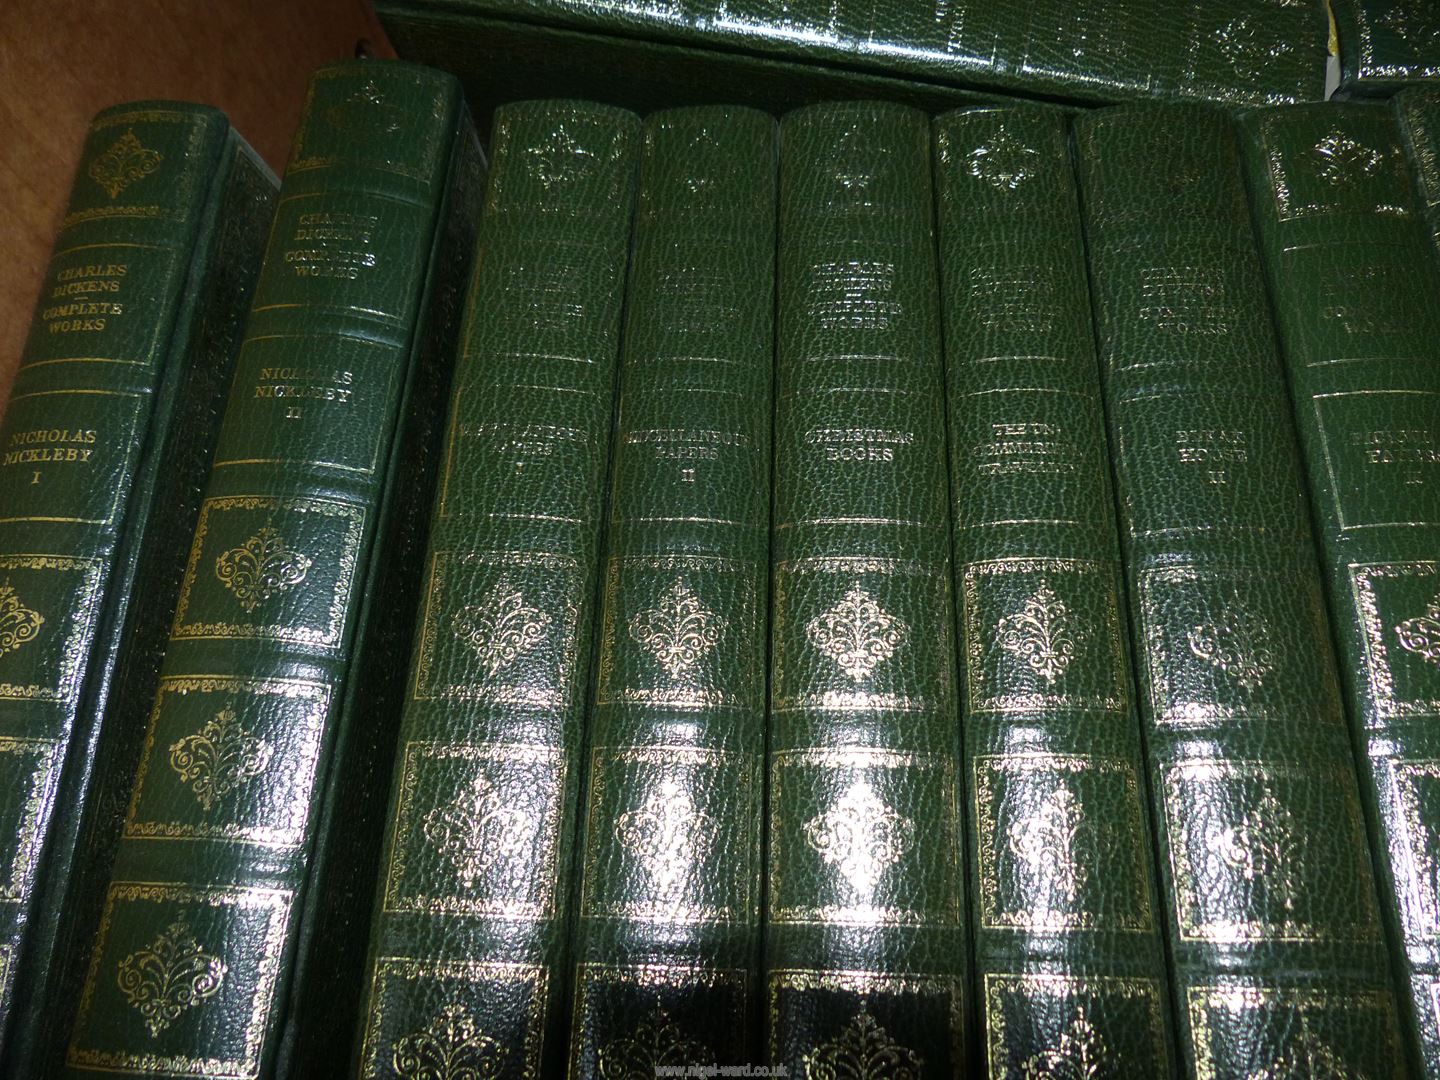 The complete works of Charles Dickens distributed by Heron Books - Centennial Edition. - Image 3 of 5